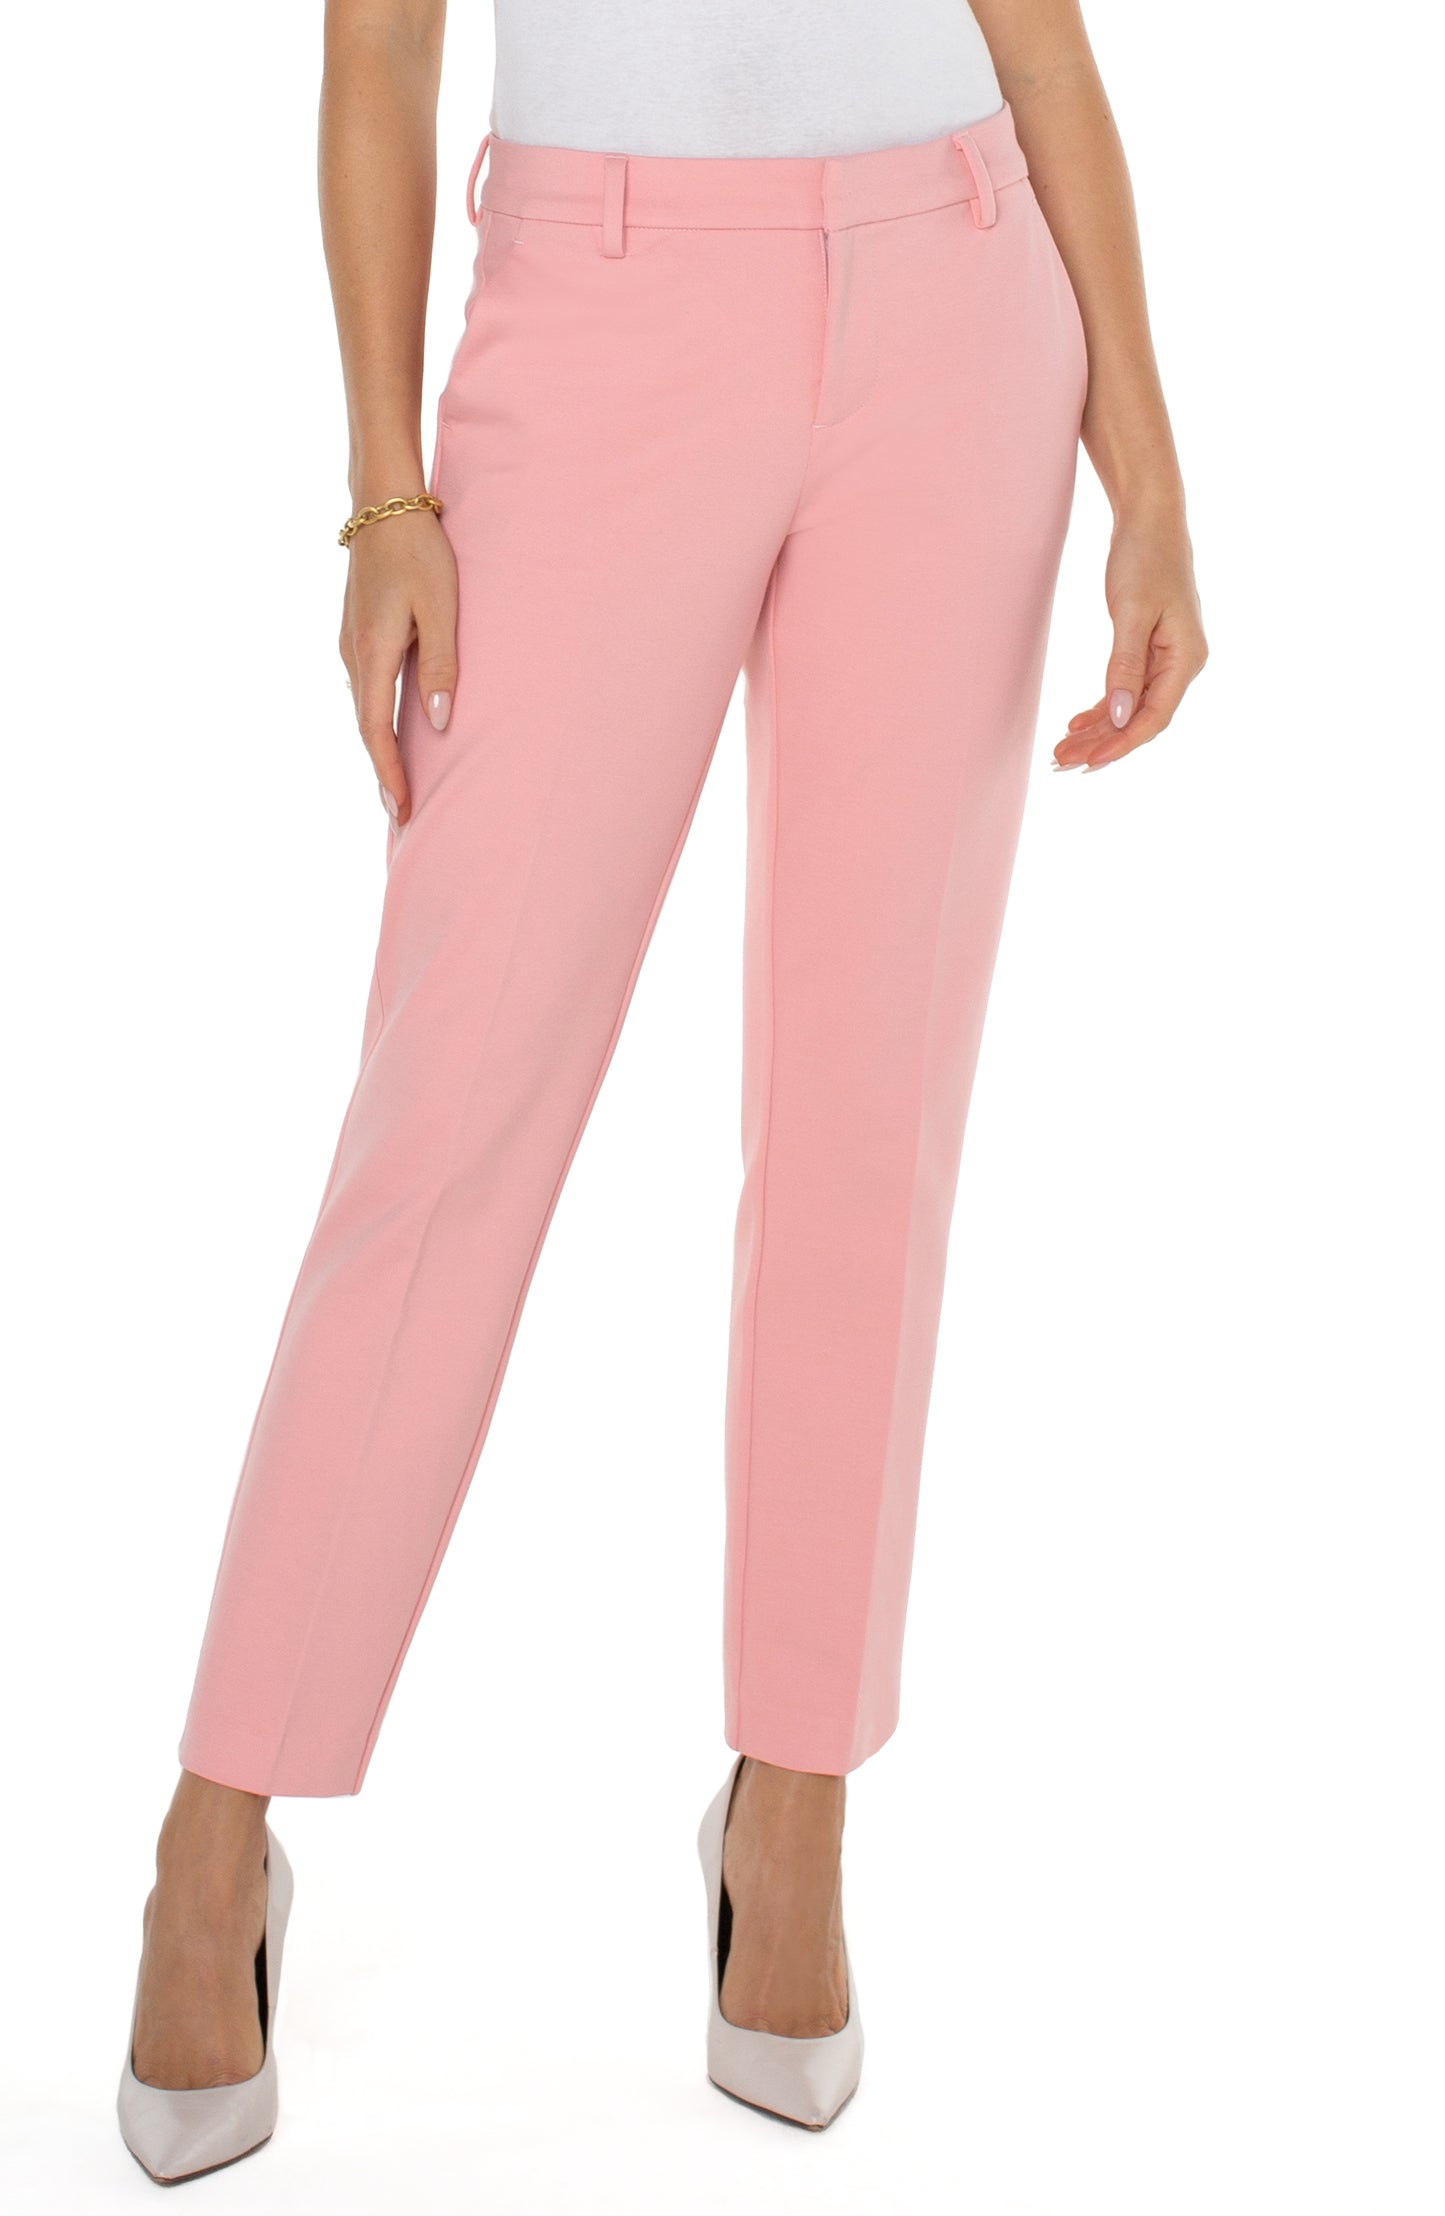 Liverpool kelsey knit trouser (pink perfection)